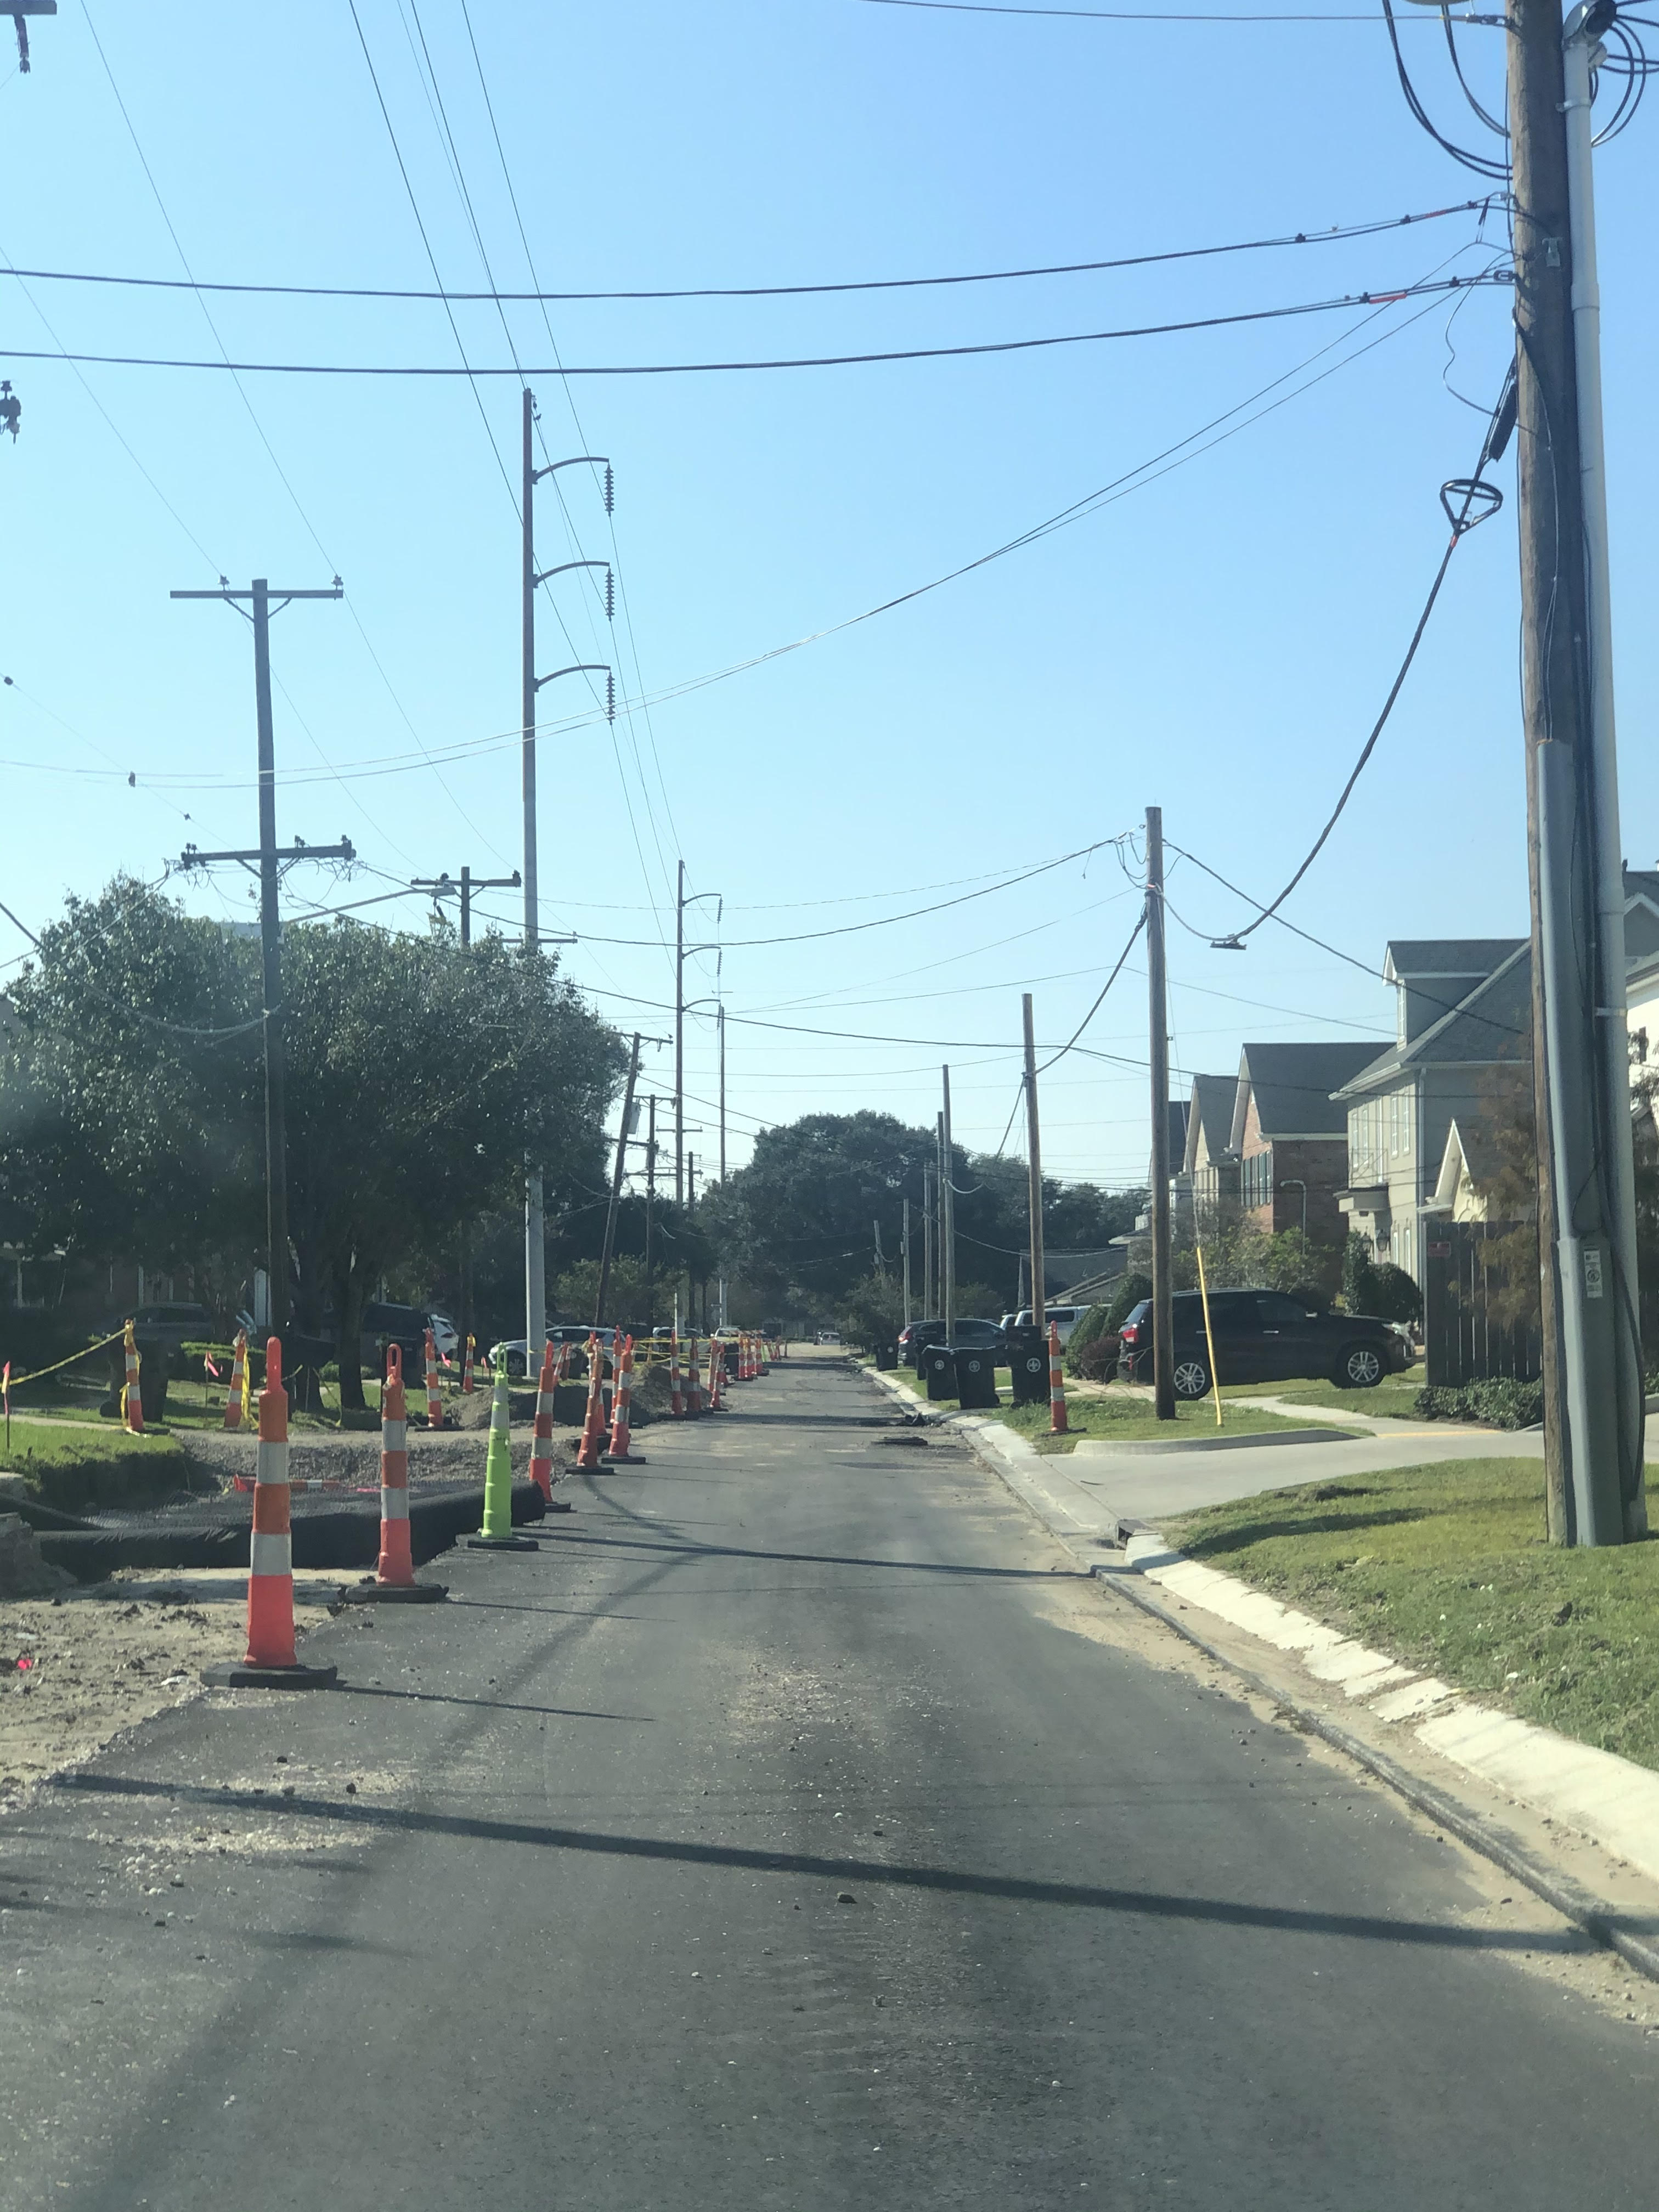 WORK TO CONTINUE ON 14th, 20th and 30th STREETS THROUGH THE END OF THE YEAR 